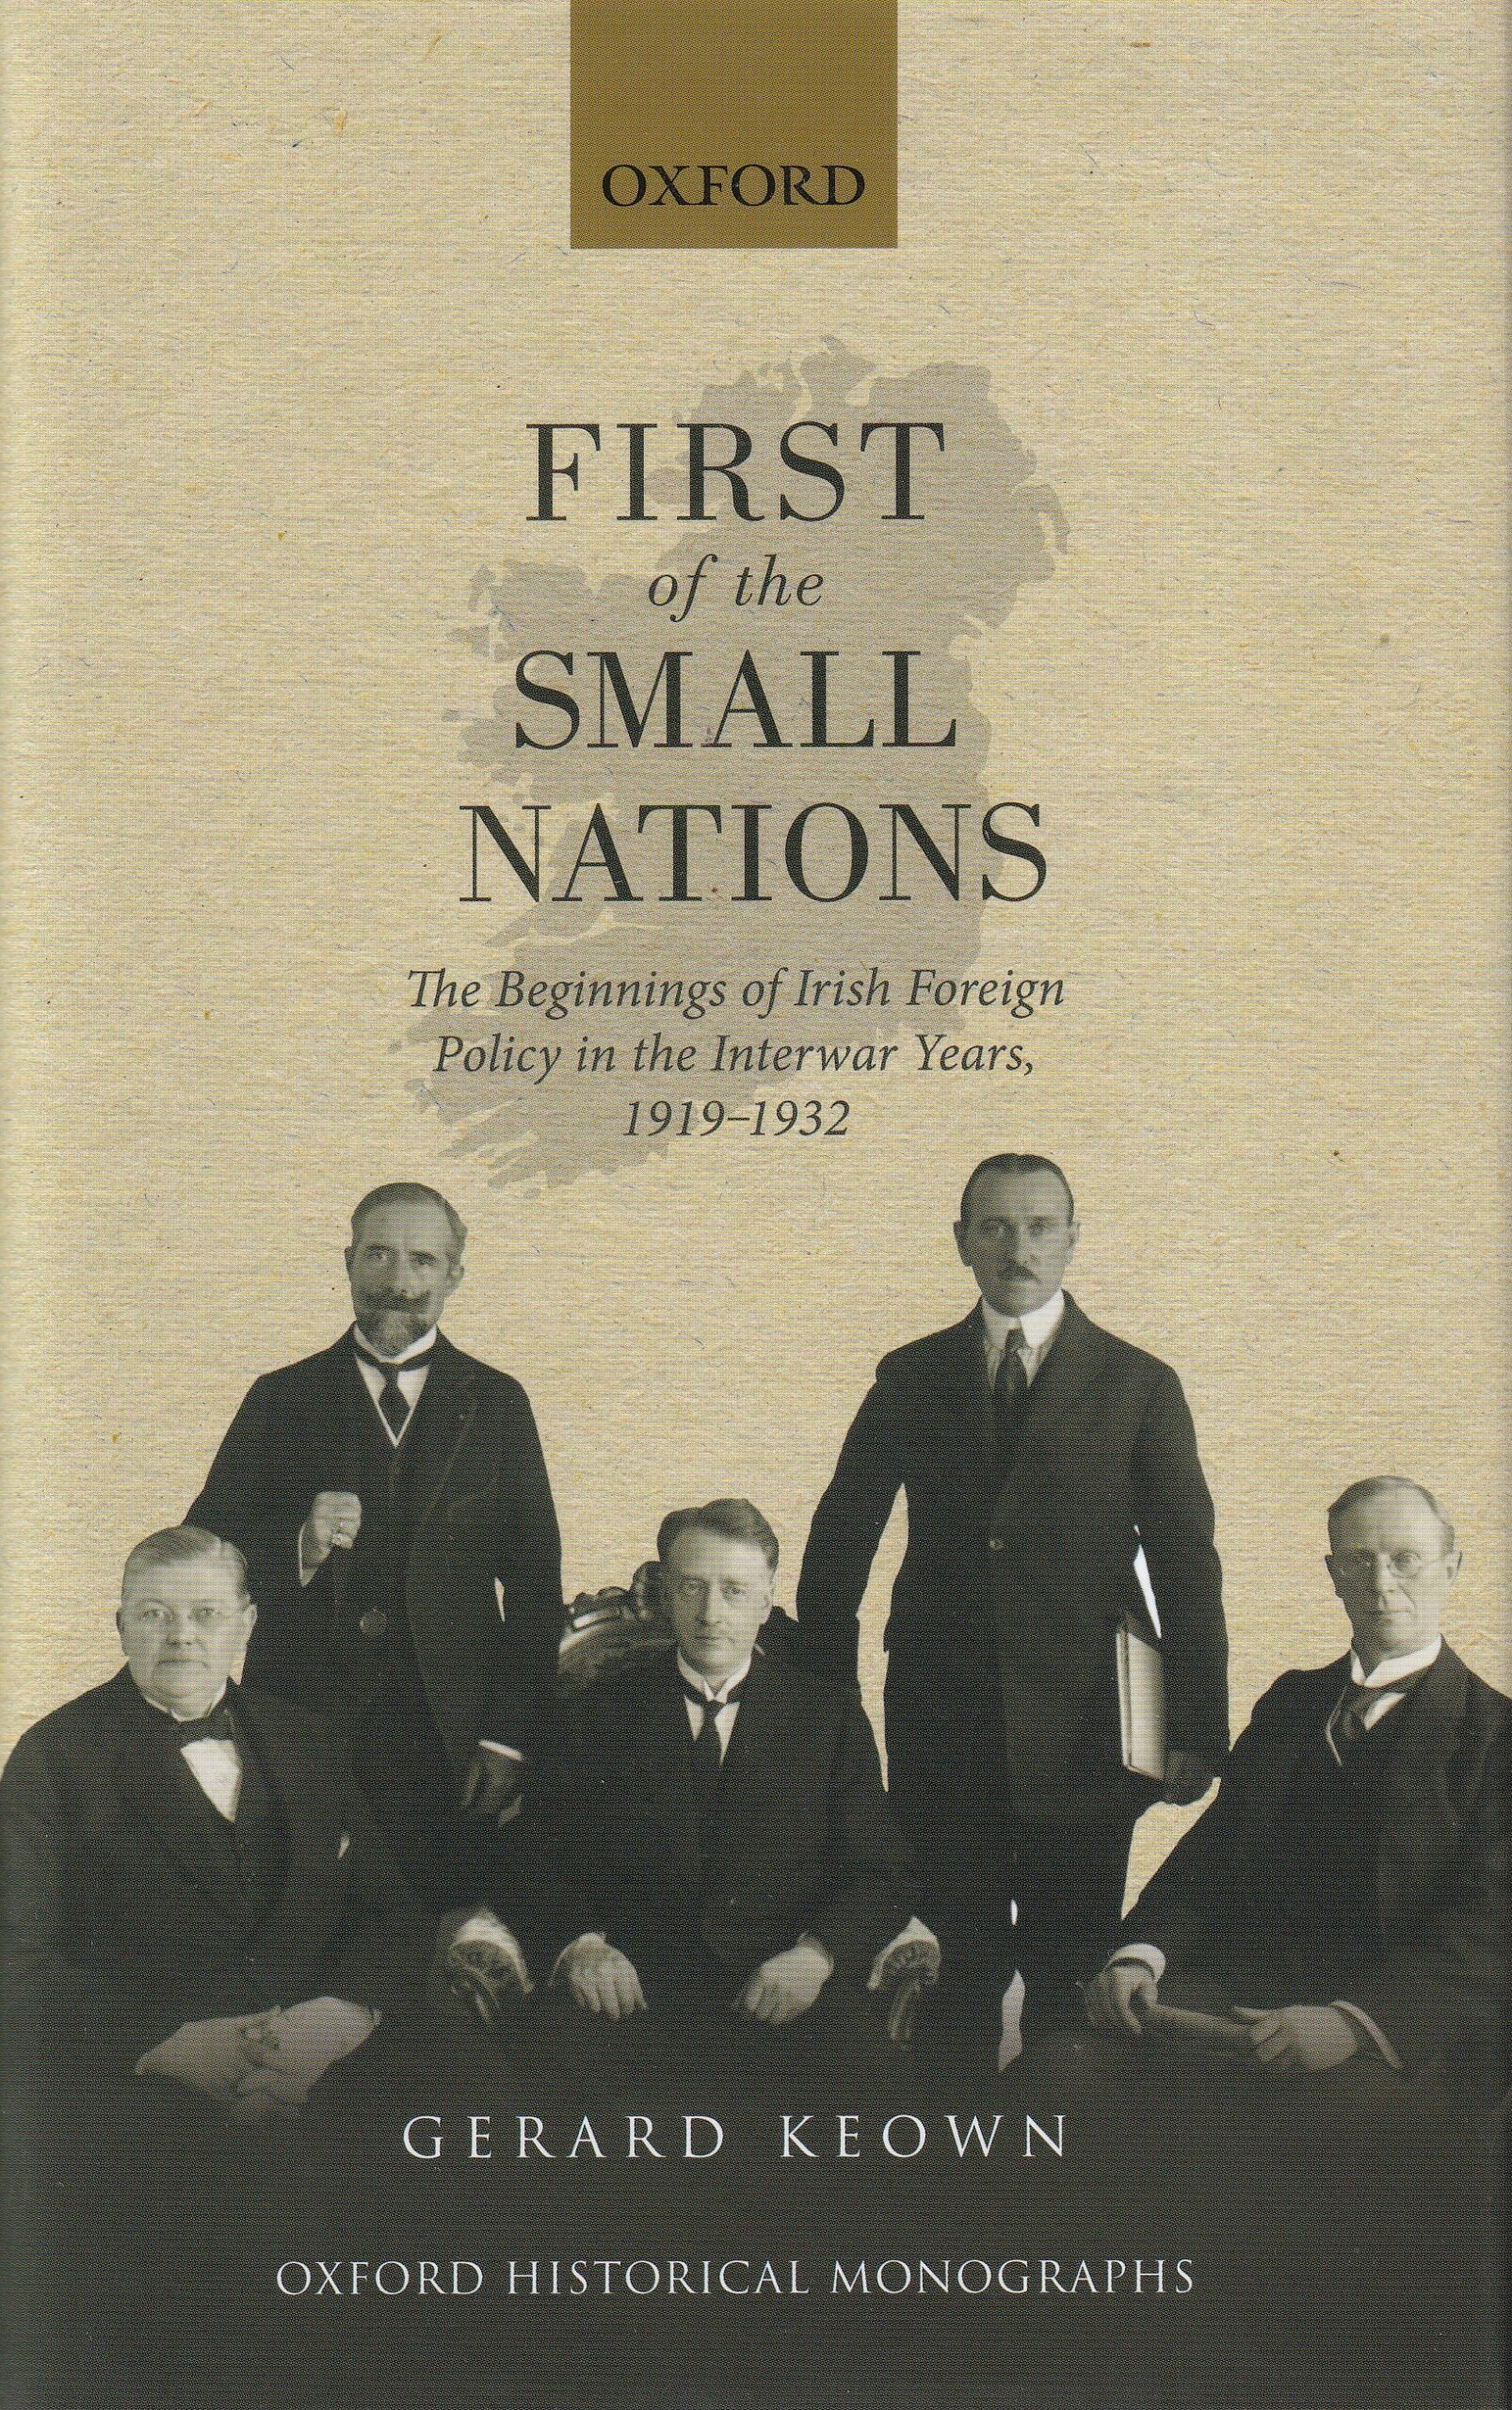 First of the Small Nations: The Beginnings of Irish Foreign Policy in the Interwar Years, 1919-1932 | Gerard Keown | Charlie Byrne's